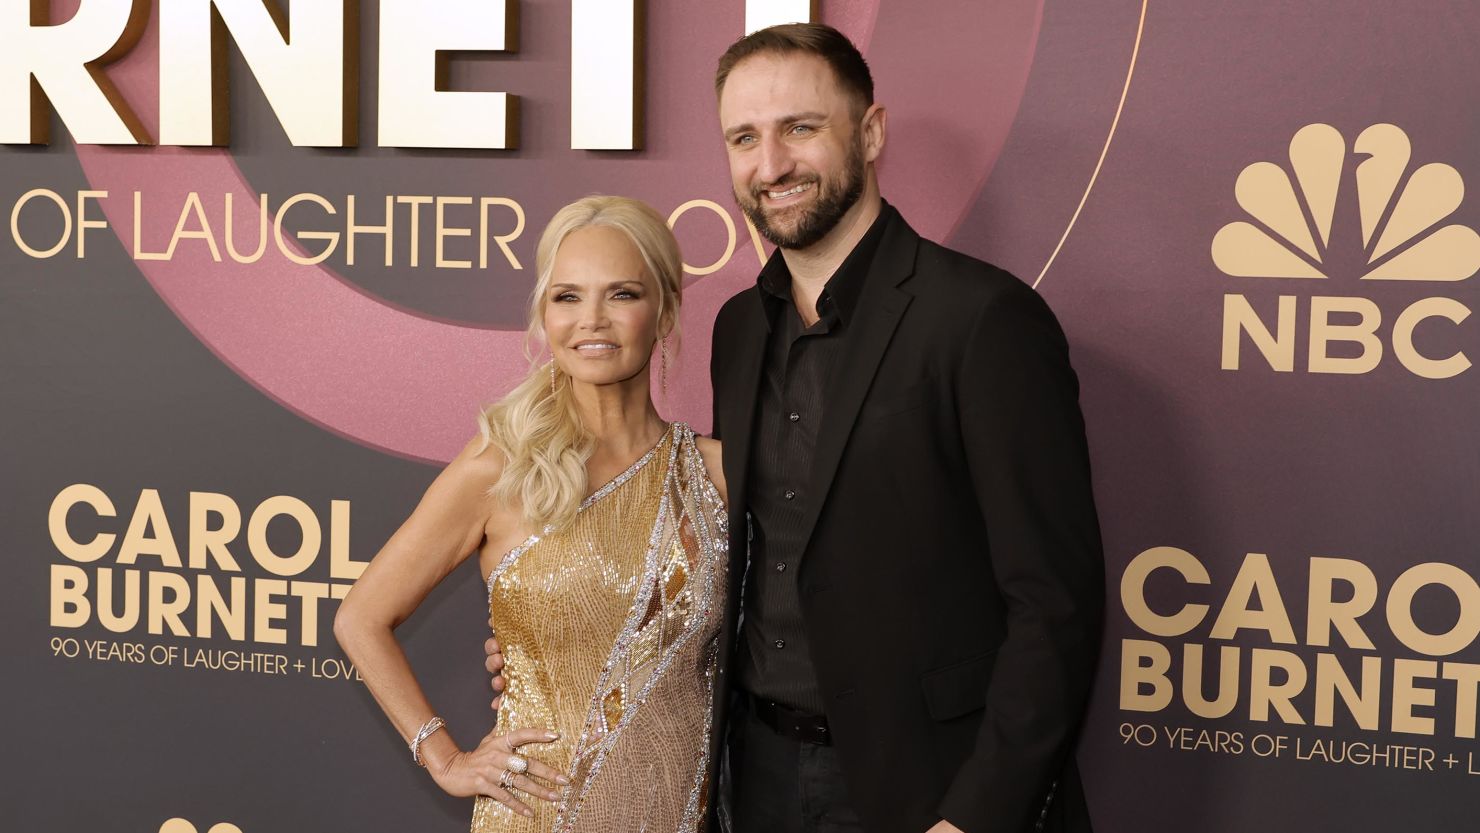 LOS ANGELES, CALIFORNIA - MARCH 02: (L-R) Kristin Chenoweth and Josh Bryant attend NBC's "Carol Burnett: 90 Years of Laughter + Love" Birthday Special at Avalon Hollywood & Bardot on March 02, 2023 in Los Angeles, California. (Photo by Kevin Winter/Getty Images)